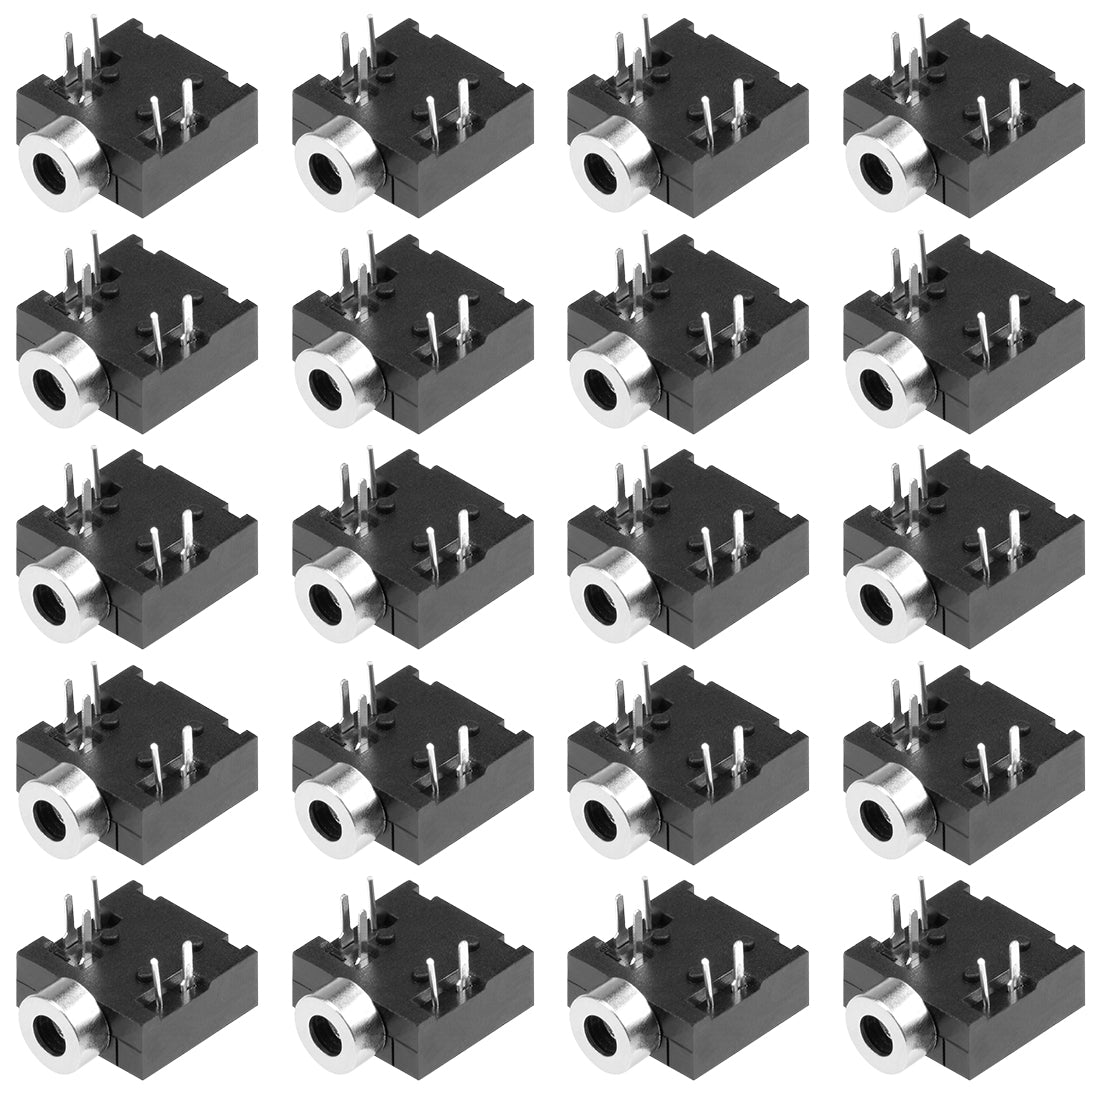 uxcell Uxcell PCB Mount 2.5mm 5 Pin Socket Headphone Stereo Jack Audio Video Connector PJ204 Black 20Pcs